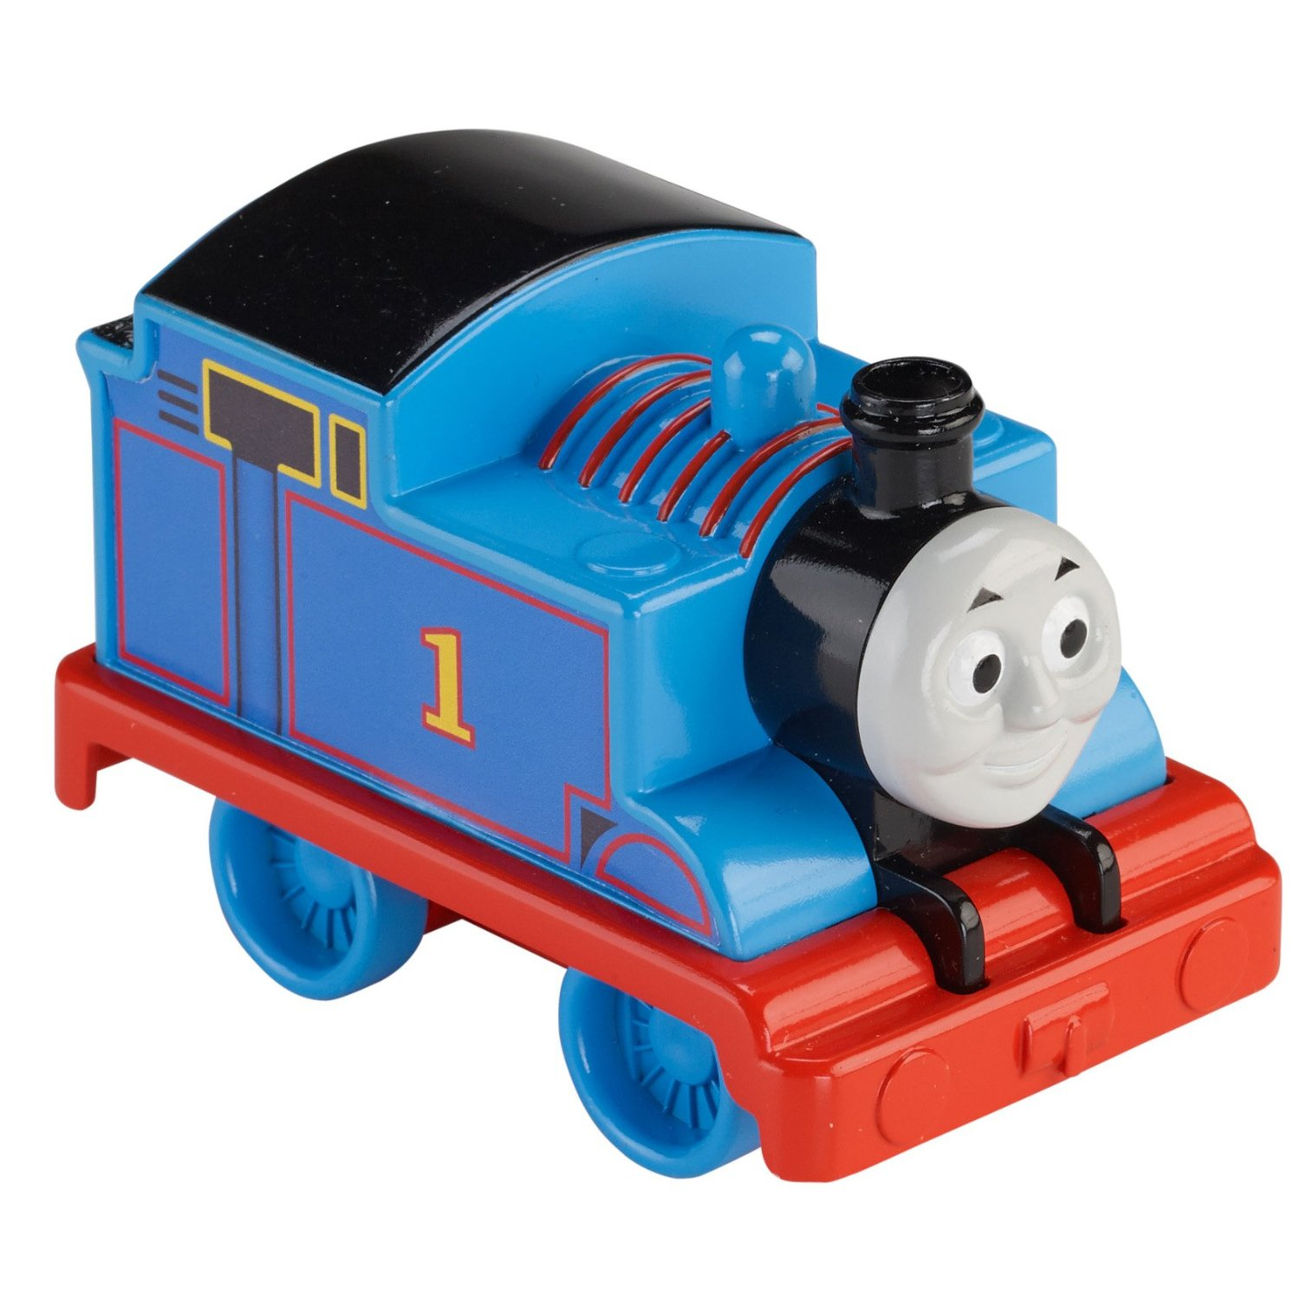 Thomas and Friends Паровозик Томас